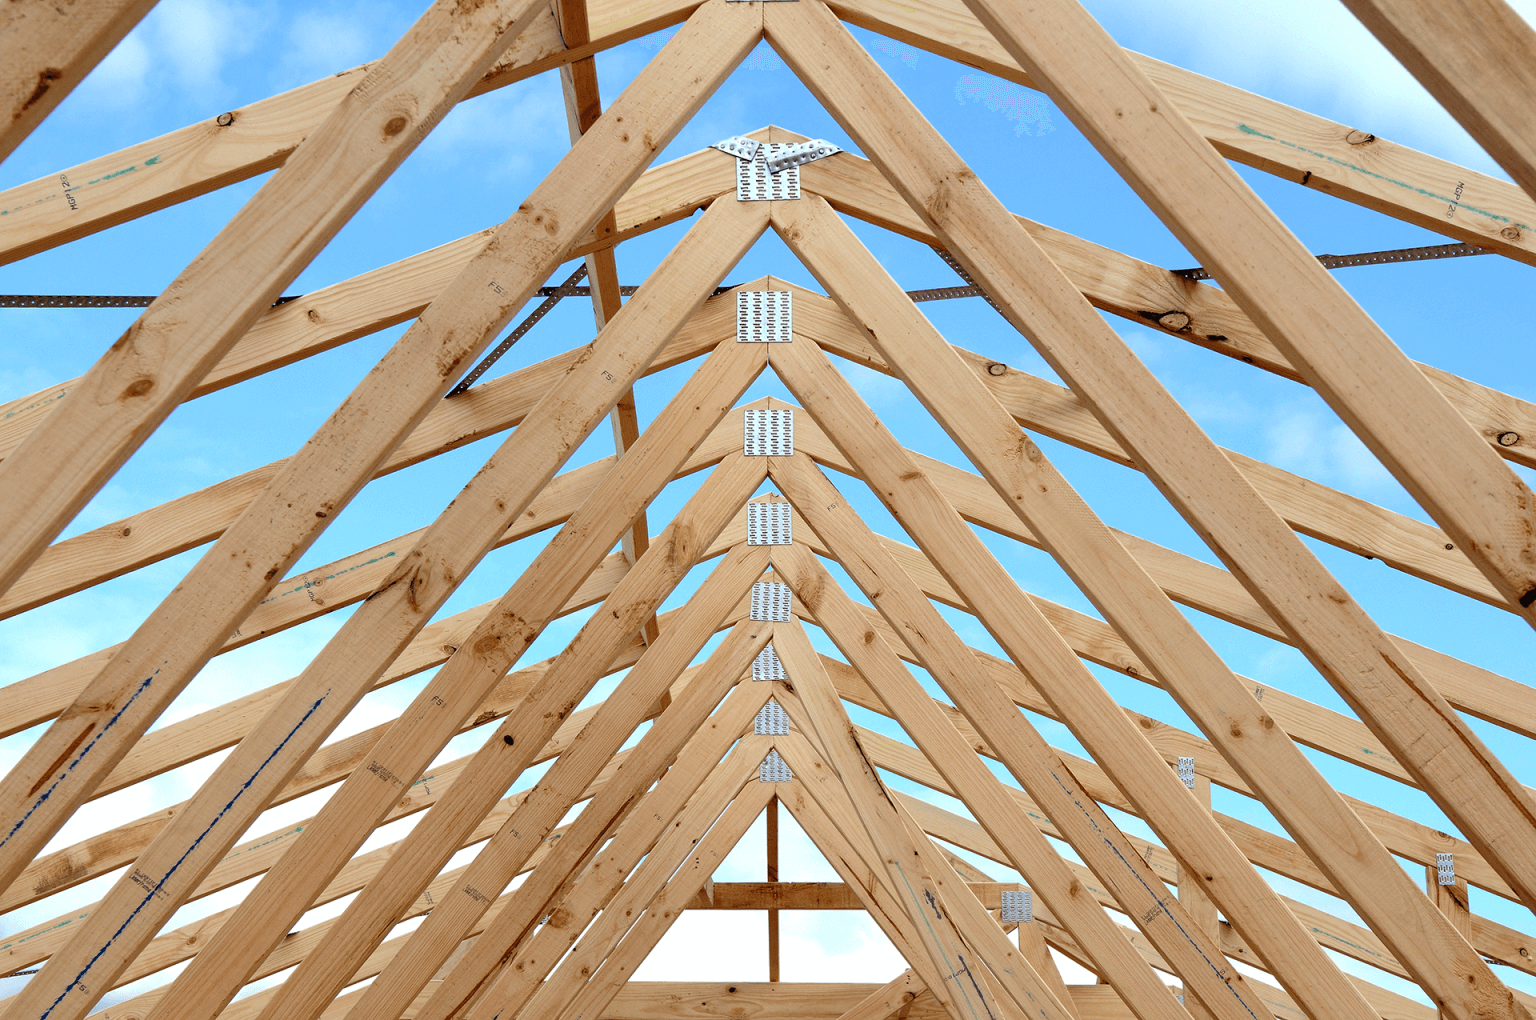 5. The Importance of Proper Nail Connection Design in Wood Trusses - wide 10